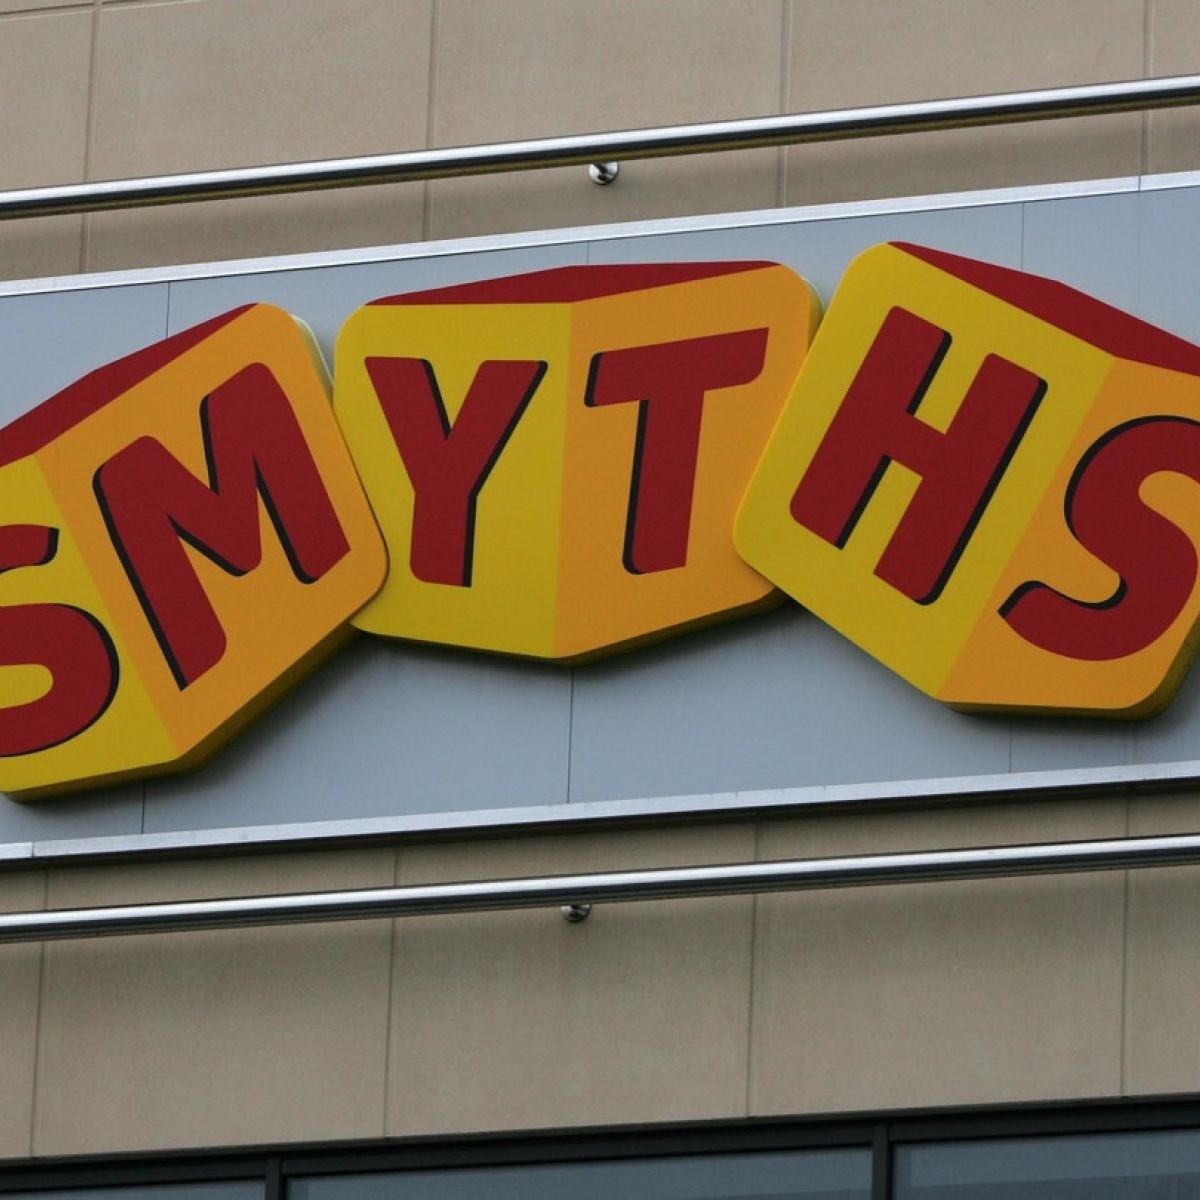 smyths toys for 6 year olds